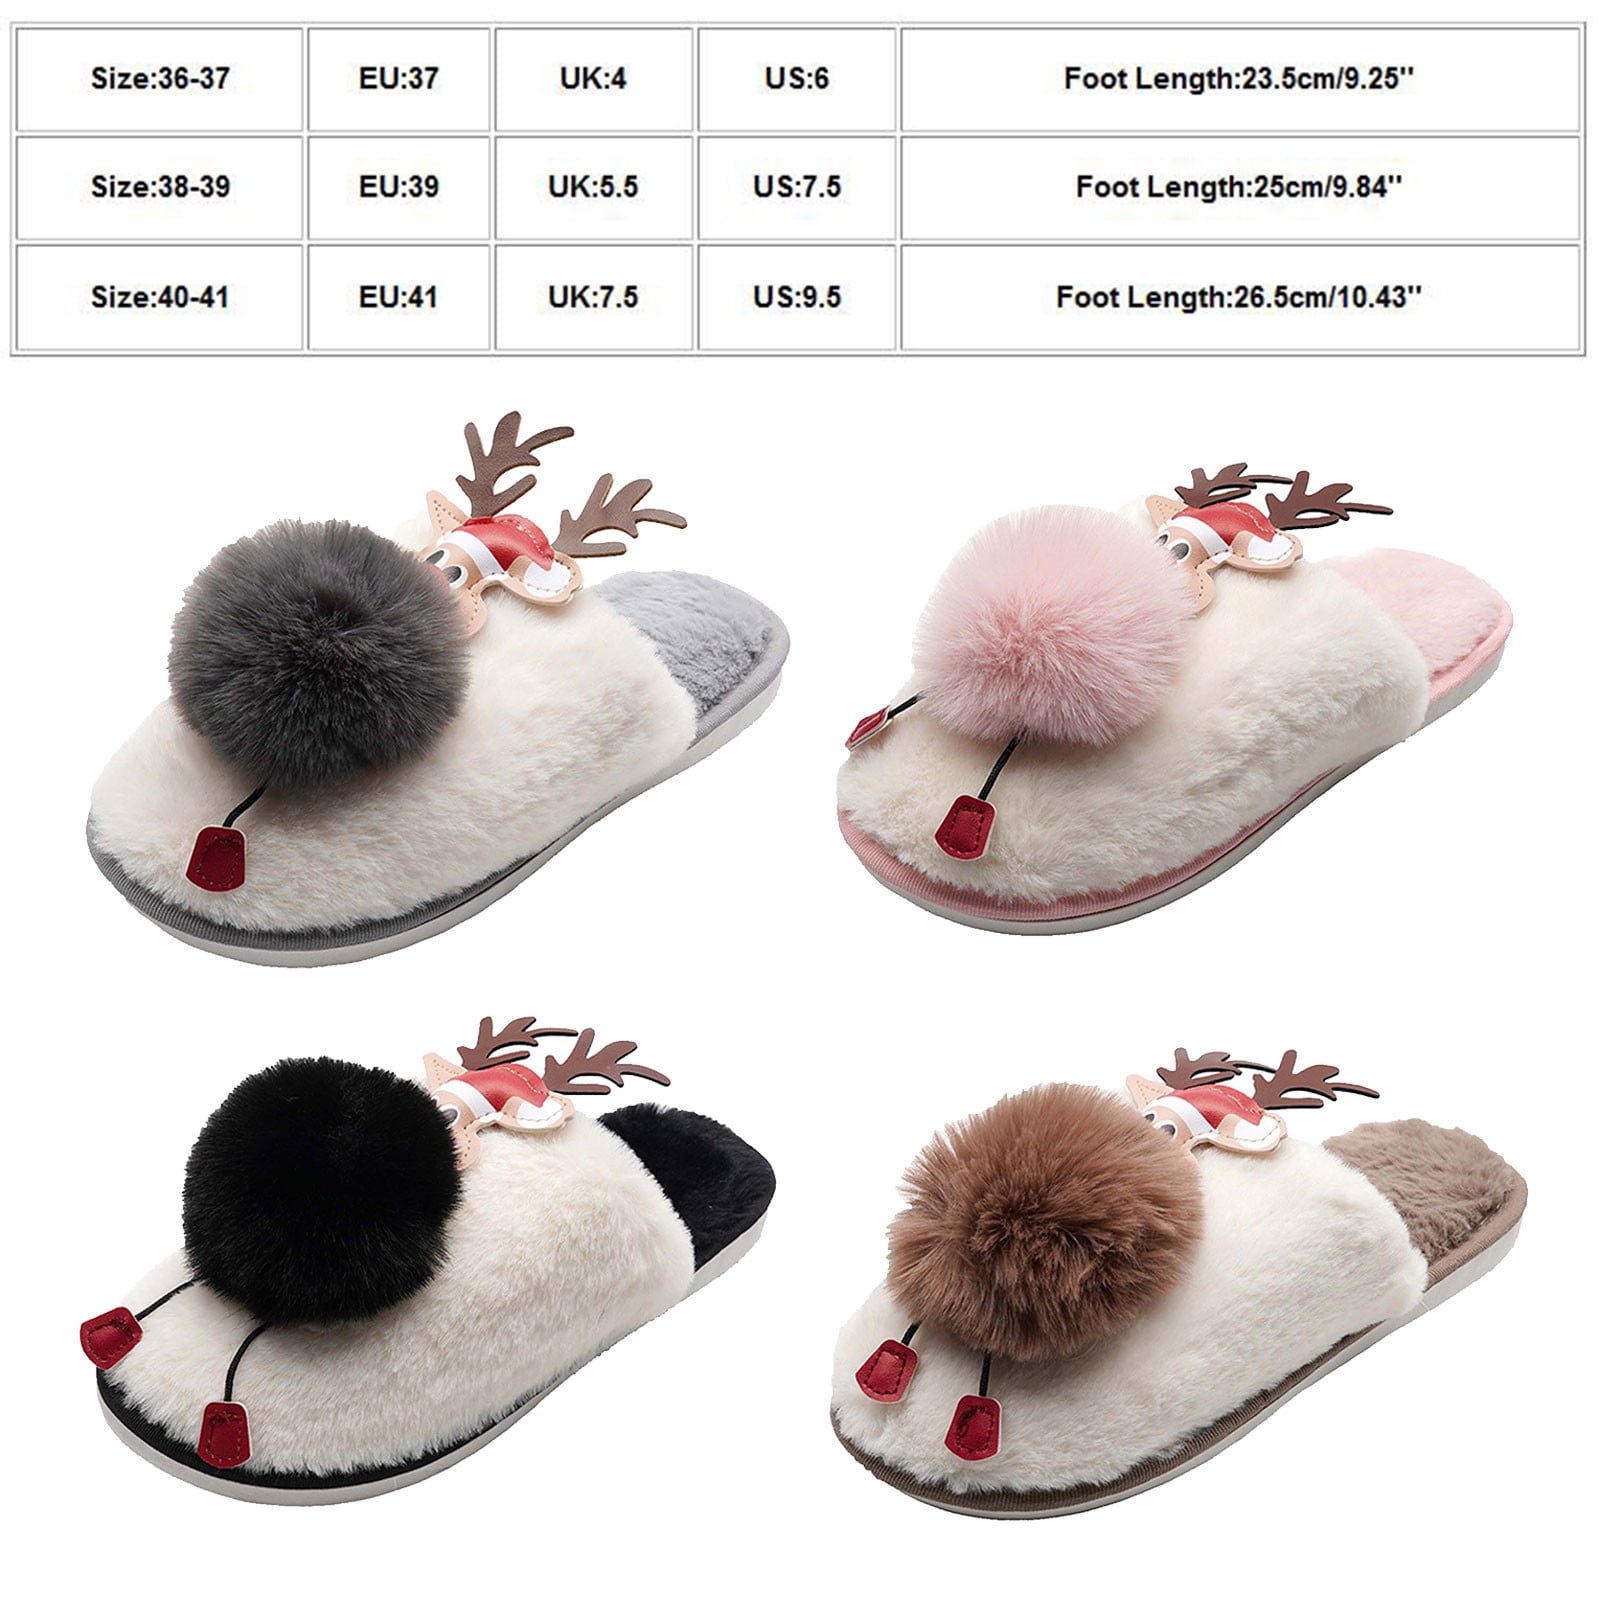 Puntoco Plush Slippers Outdoor House Shoes Clearanc Christmas Hair-Ball ...